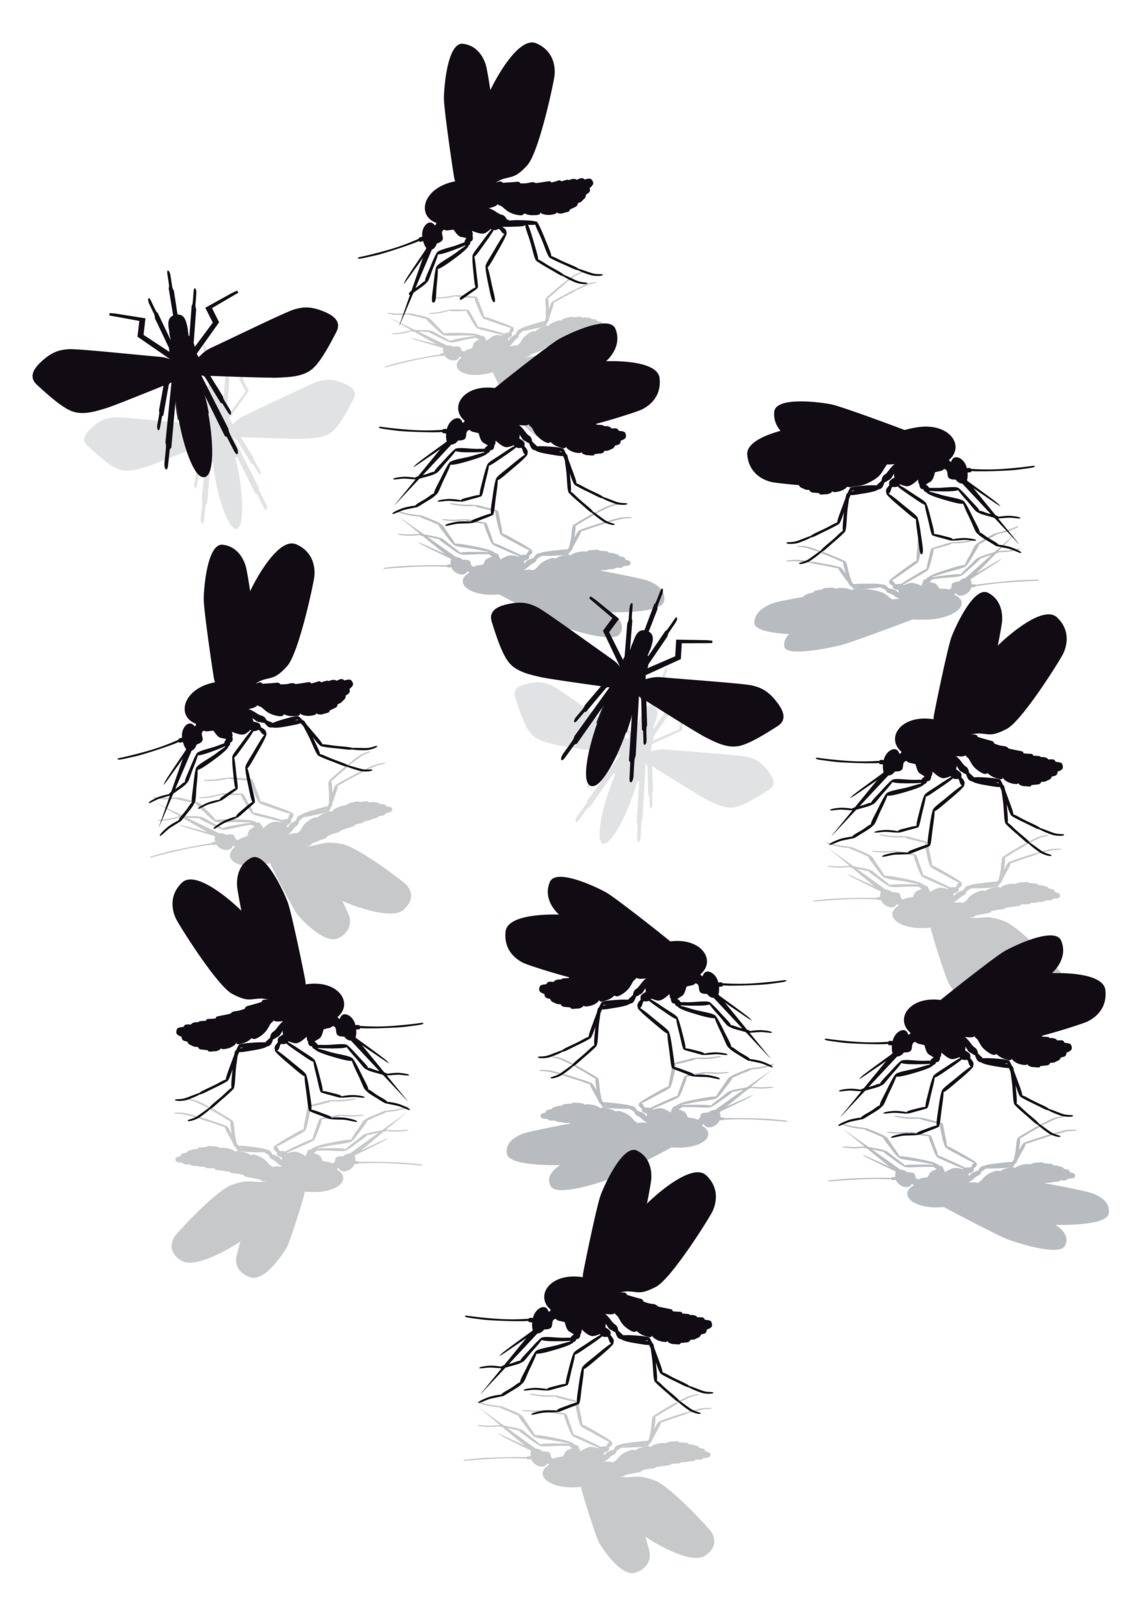 mosquitoes plague by scusi